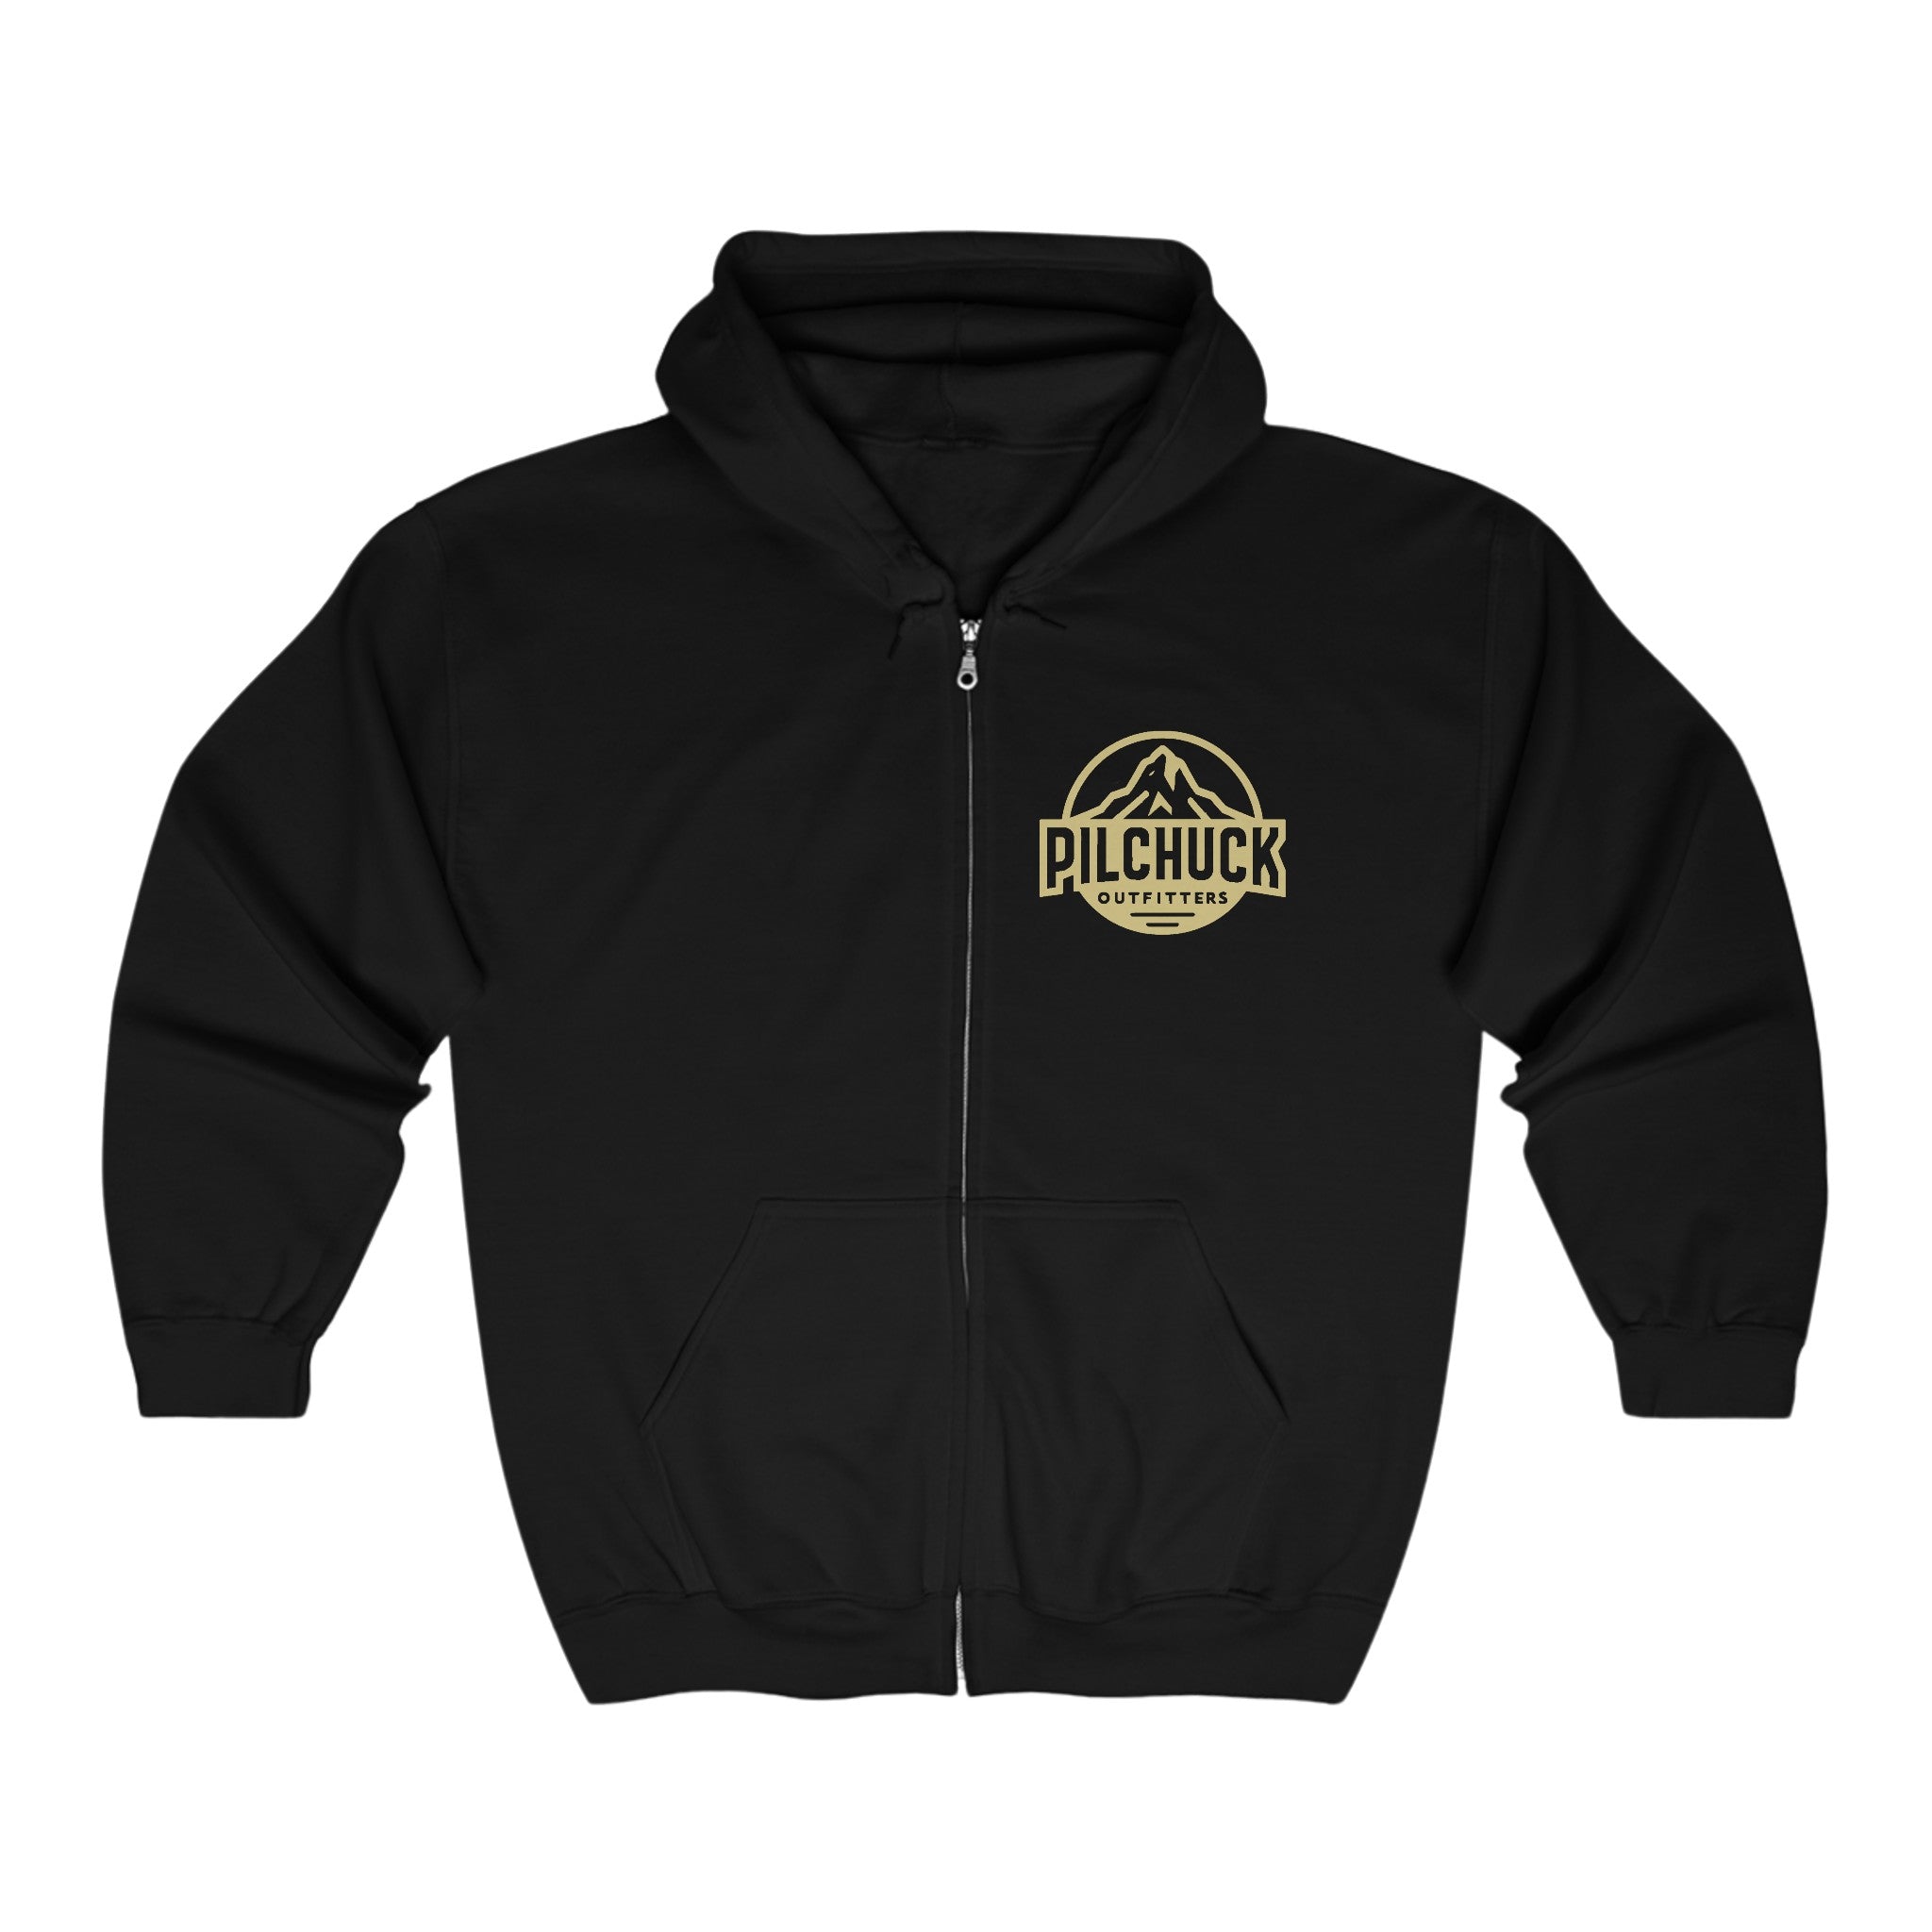 Gold Pilchuck Outfitters Classic Unisex Heavy Blend Full Zip Hooded Sweatshirt